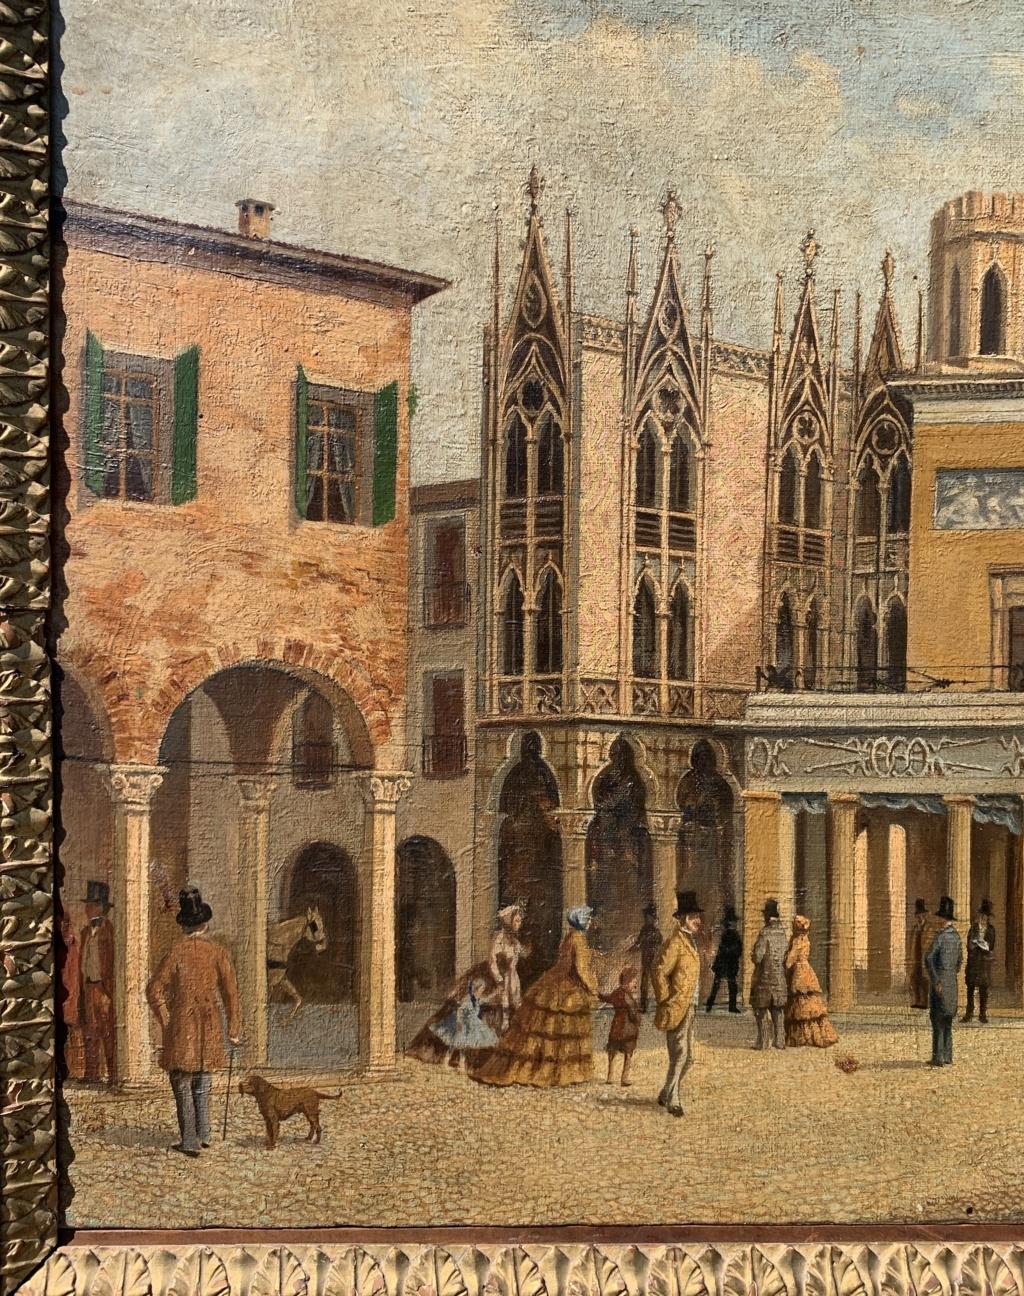 Venetian painter (19th century) - Padua, Caffè Pedrocchi.

37.5 x 48.5 cm without frame, 50.5 x 60 cm with frame.

Oil on canvas, in a carved wooden frame.

Condition report: Good state of conservation of the pictorial surface, there are signs of